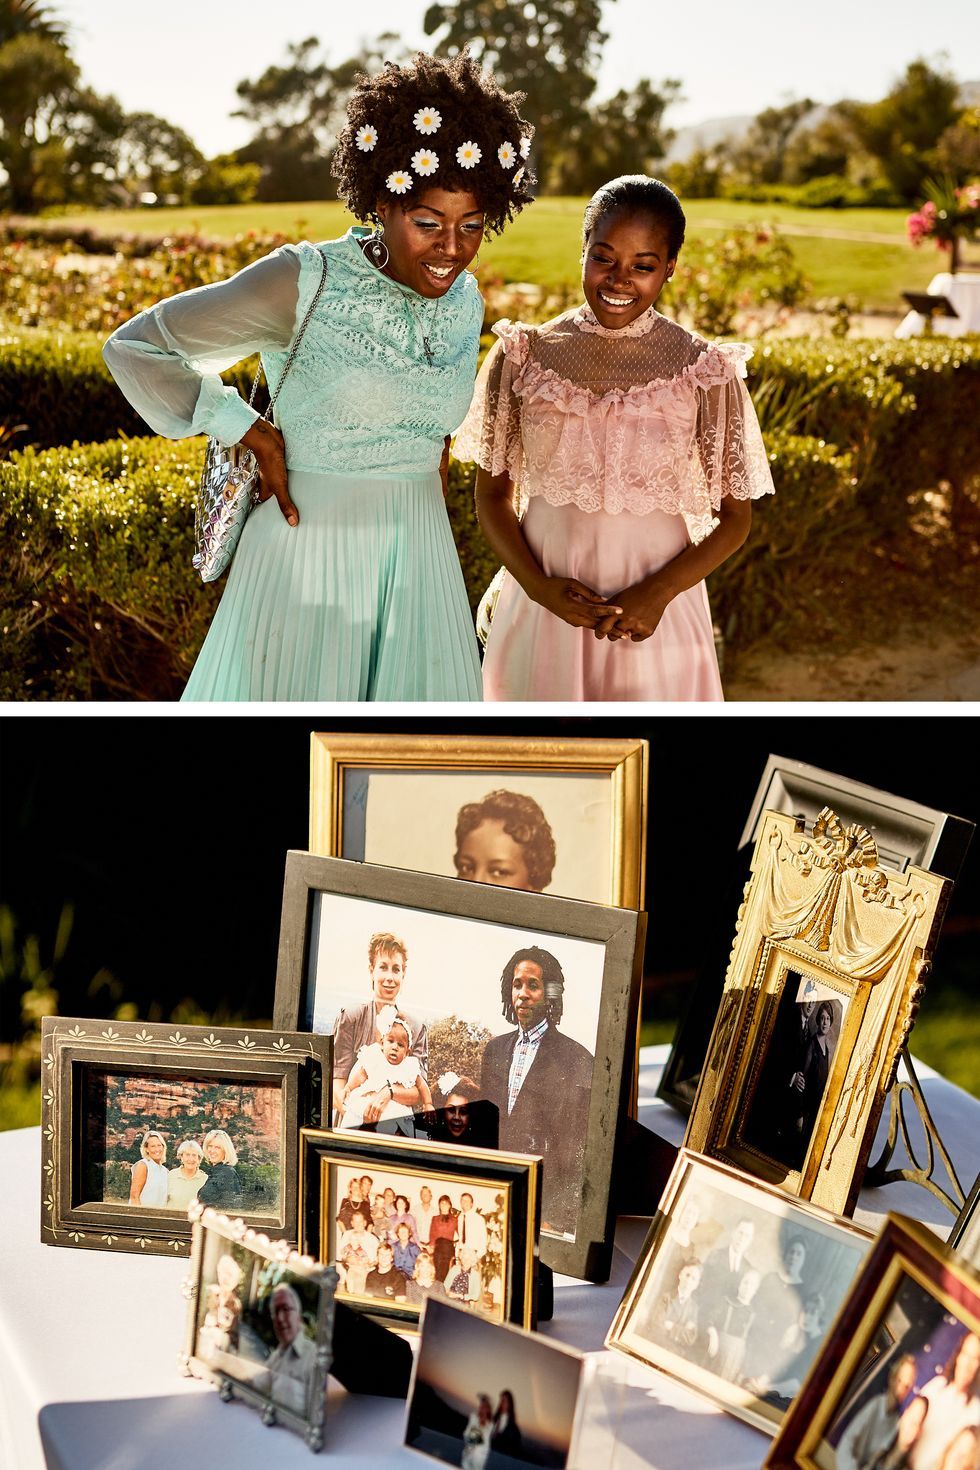 the couple displayed photos of their family's past weddings for guests to enjoy upon arrival